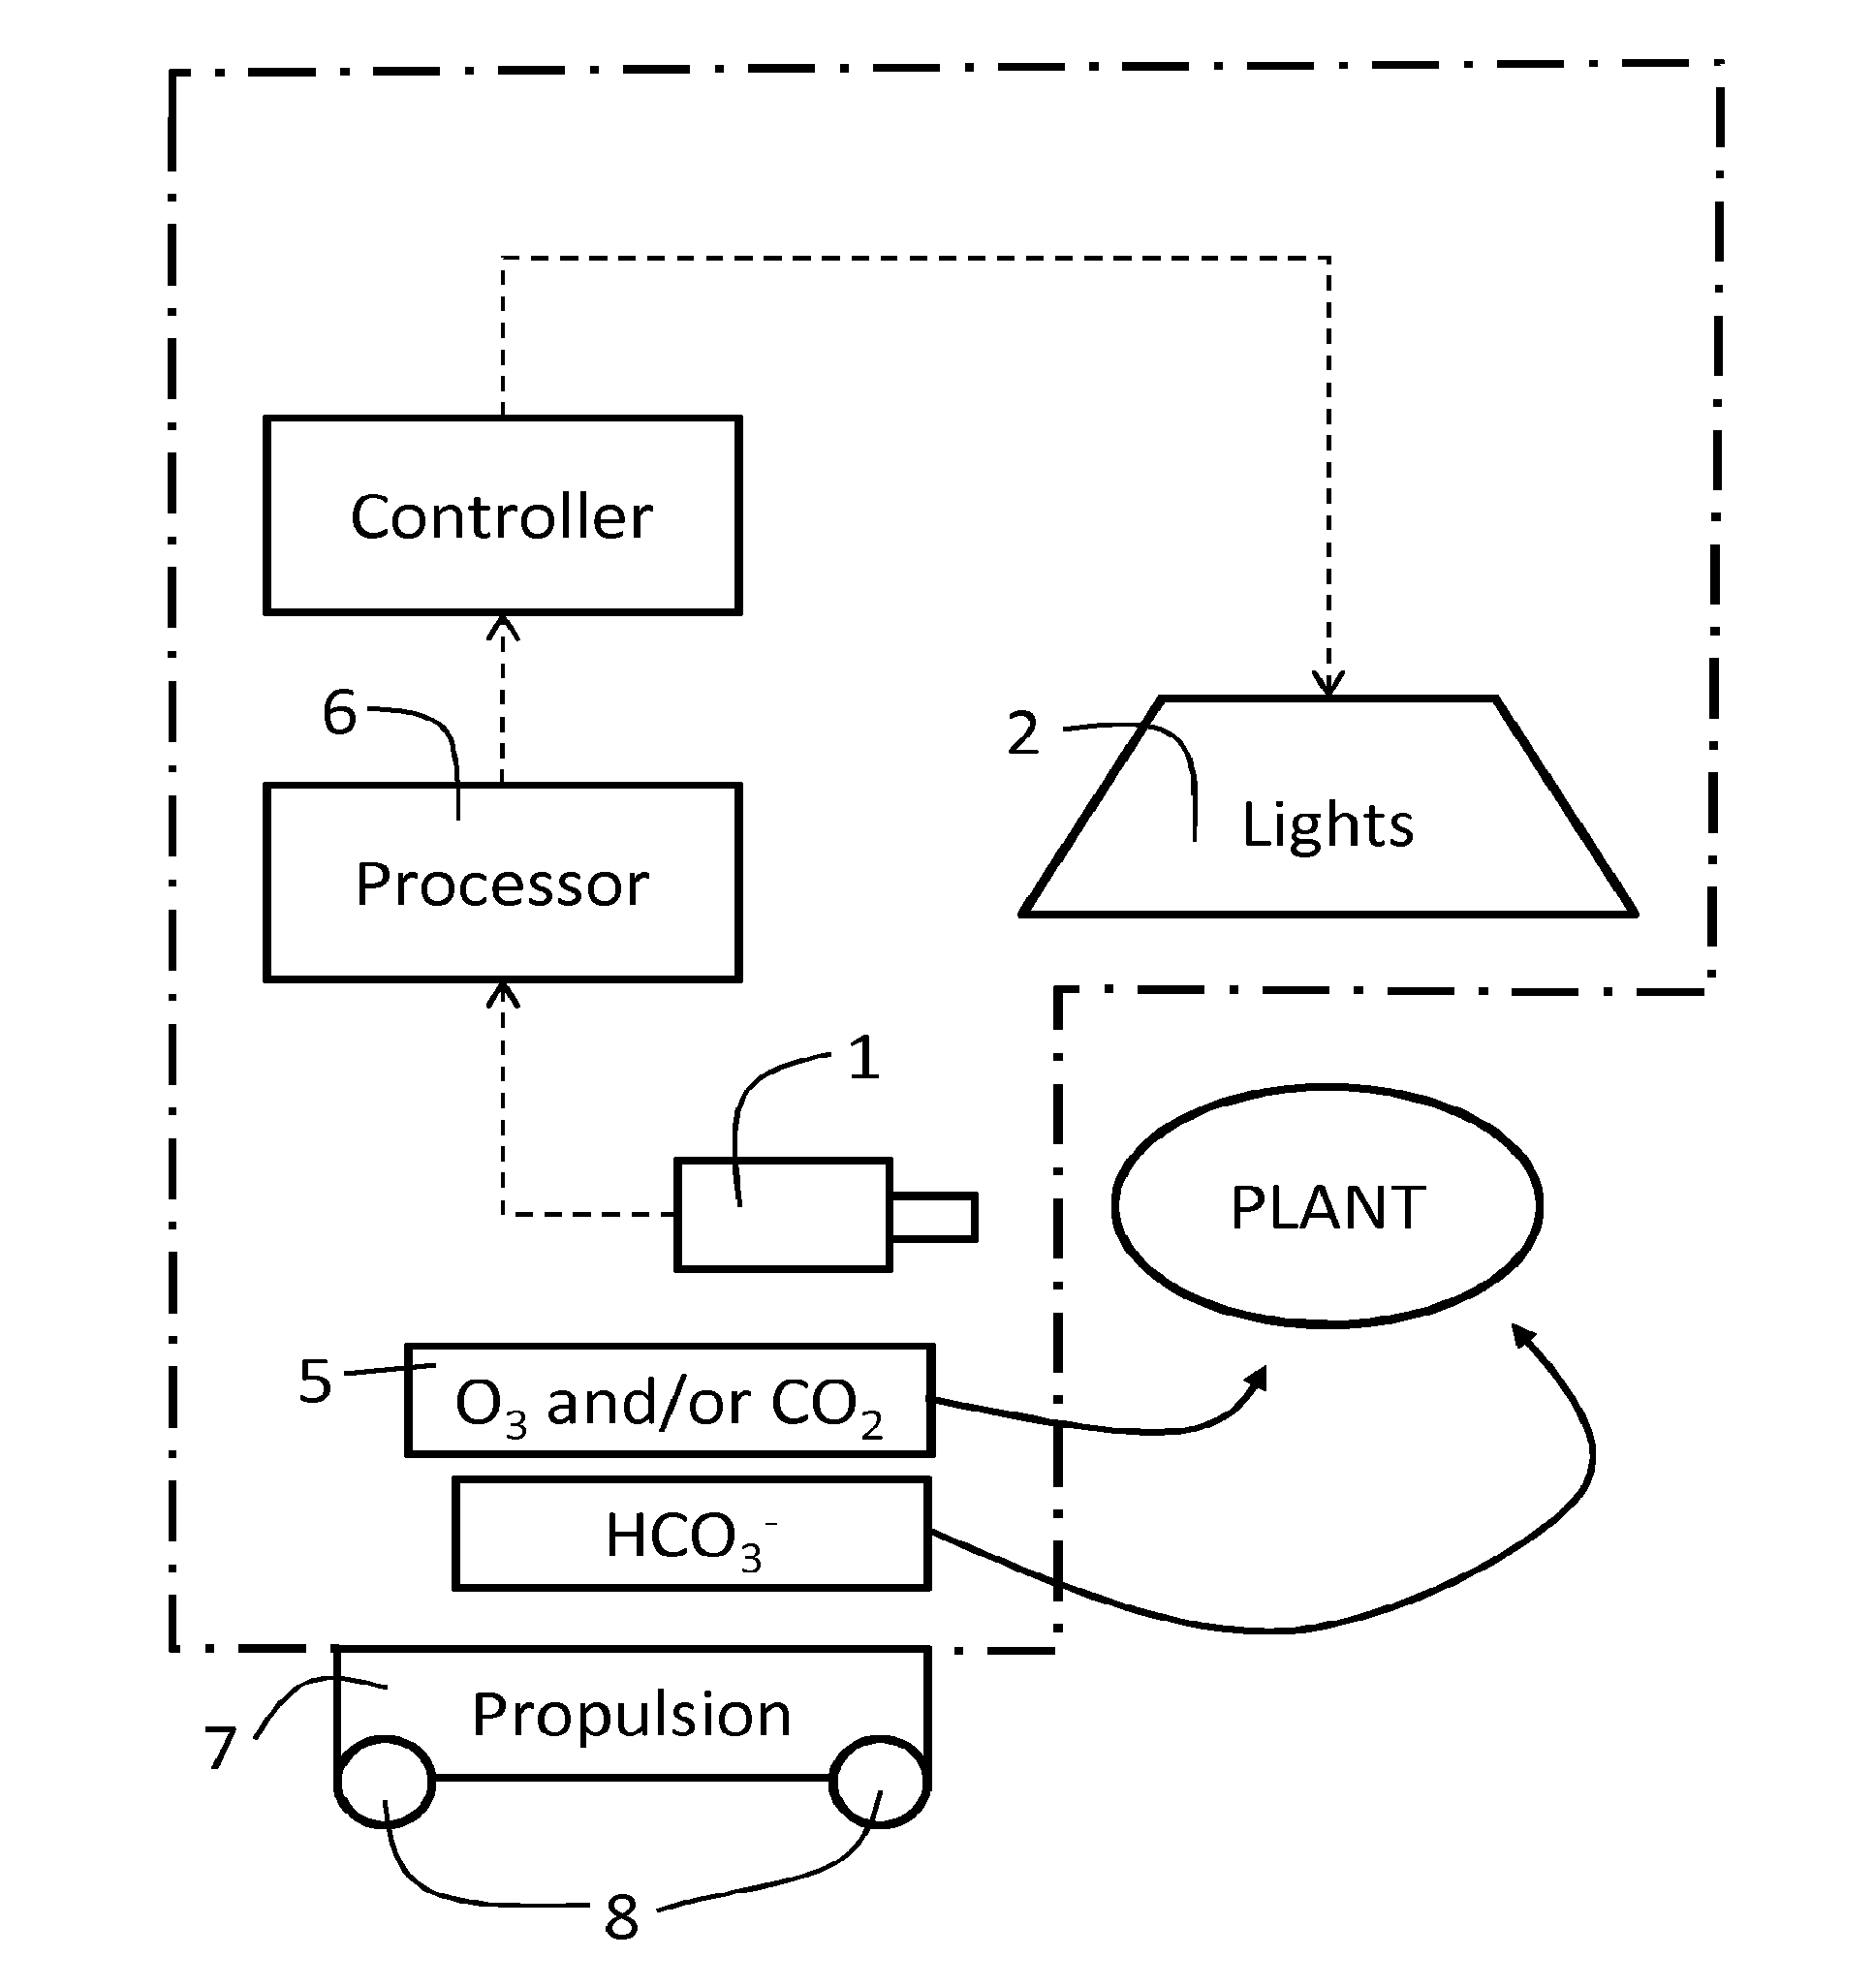 Method and apparatus for improving growth and/or pathogen resistance of a plant using transient high-intensity illumination